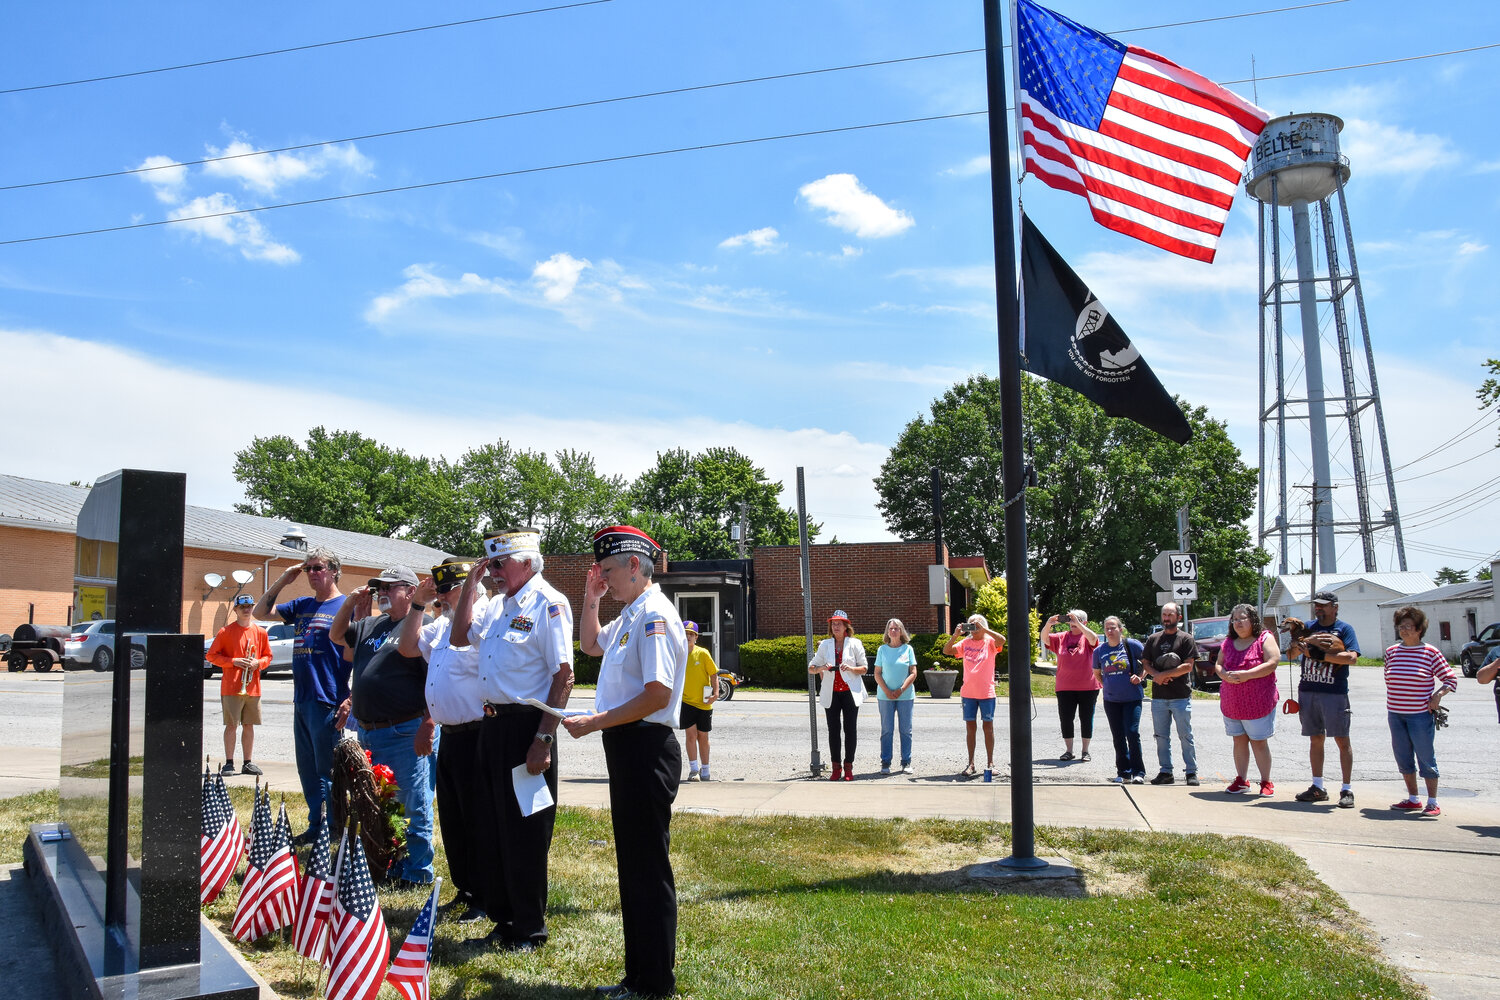 The Belle VFW Post 3410 hosted a Memorial Day service at the city’s Veteran’s Memorial located at the four-way stop on Alvarado Avenue.